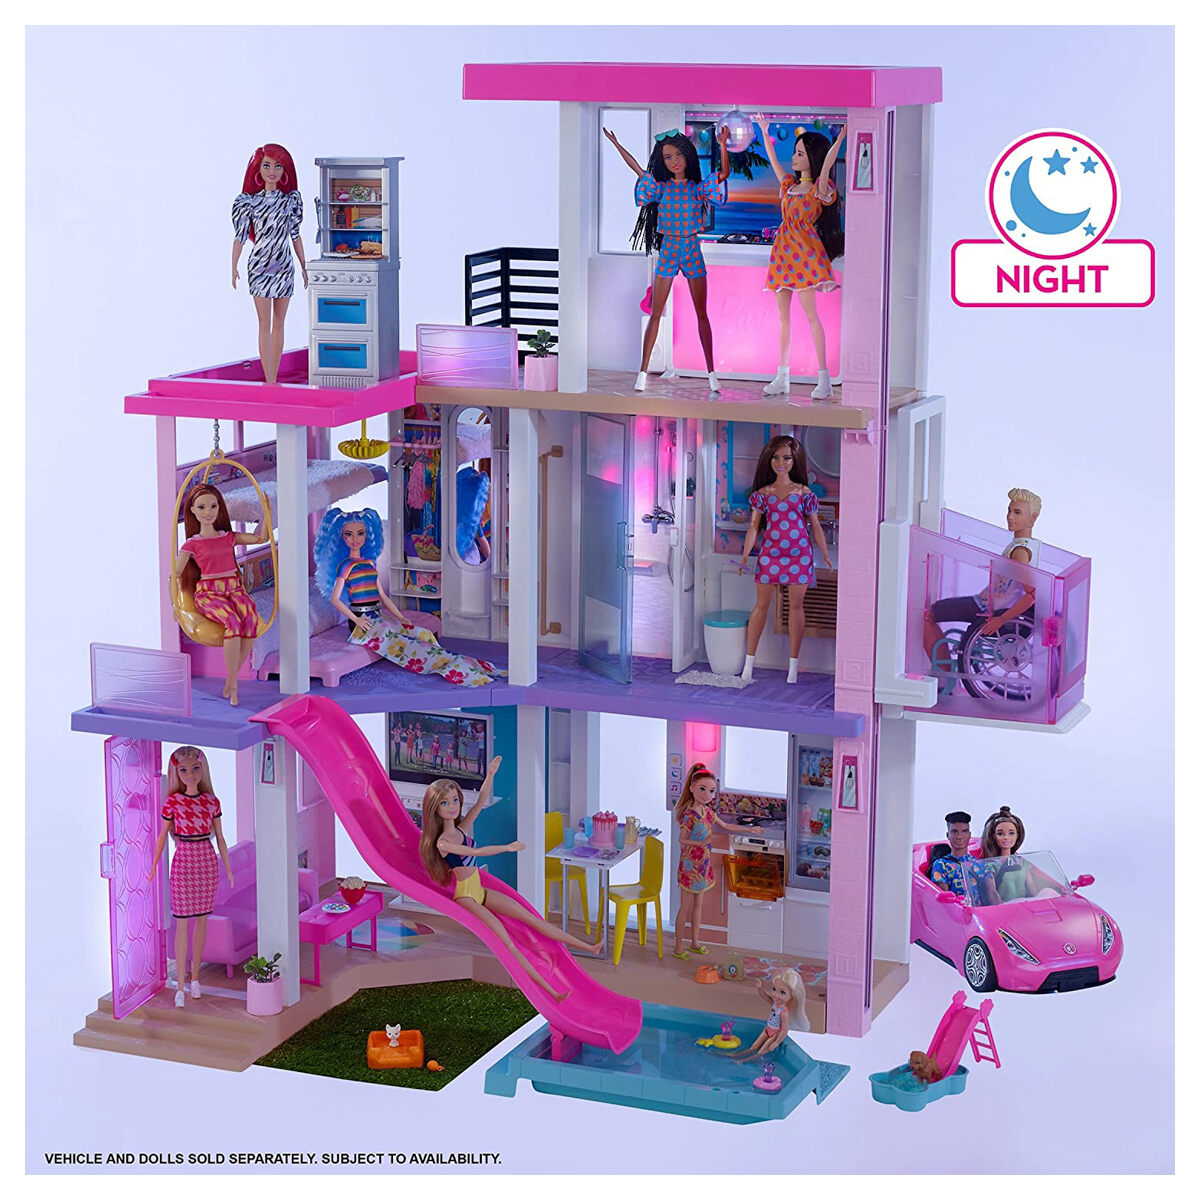 Barbie DreamHouse Playset with 10 Play Areas, 75+ Furniture & Accessories,  Lights & Sounds 